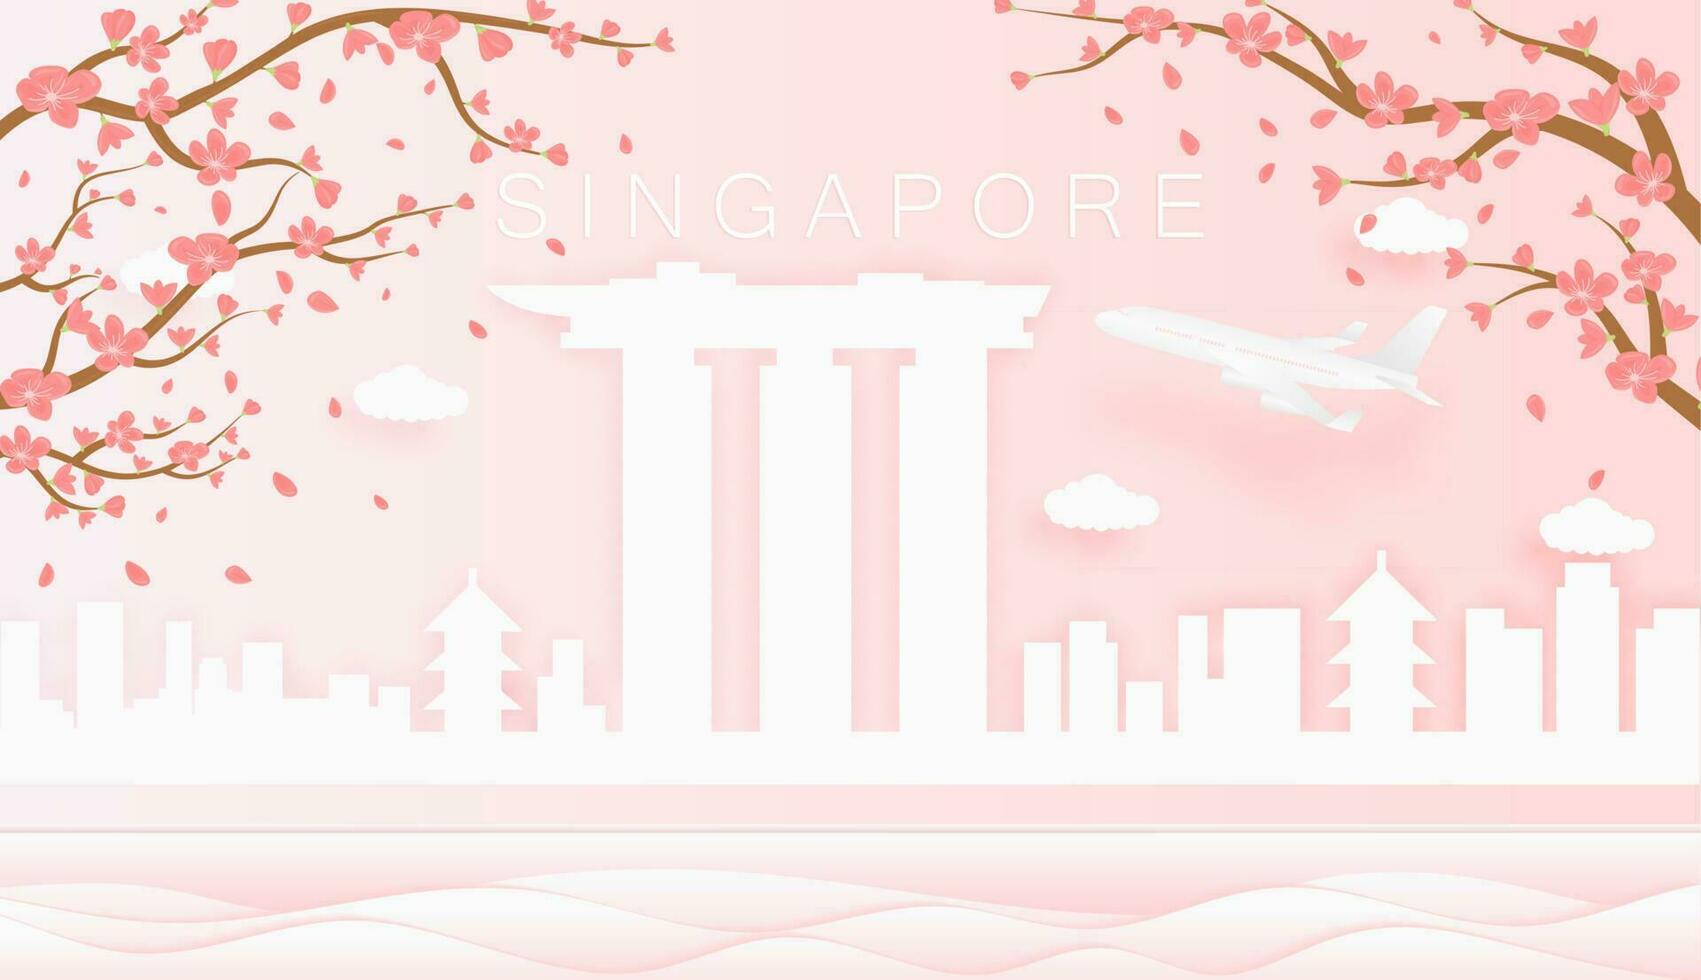 Panorama travel postcard, poster, tour advertising of world famous landmarks of Singapore, spring season with blooming flowers in tree vector icon